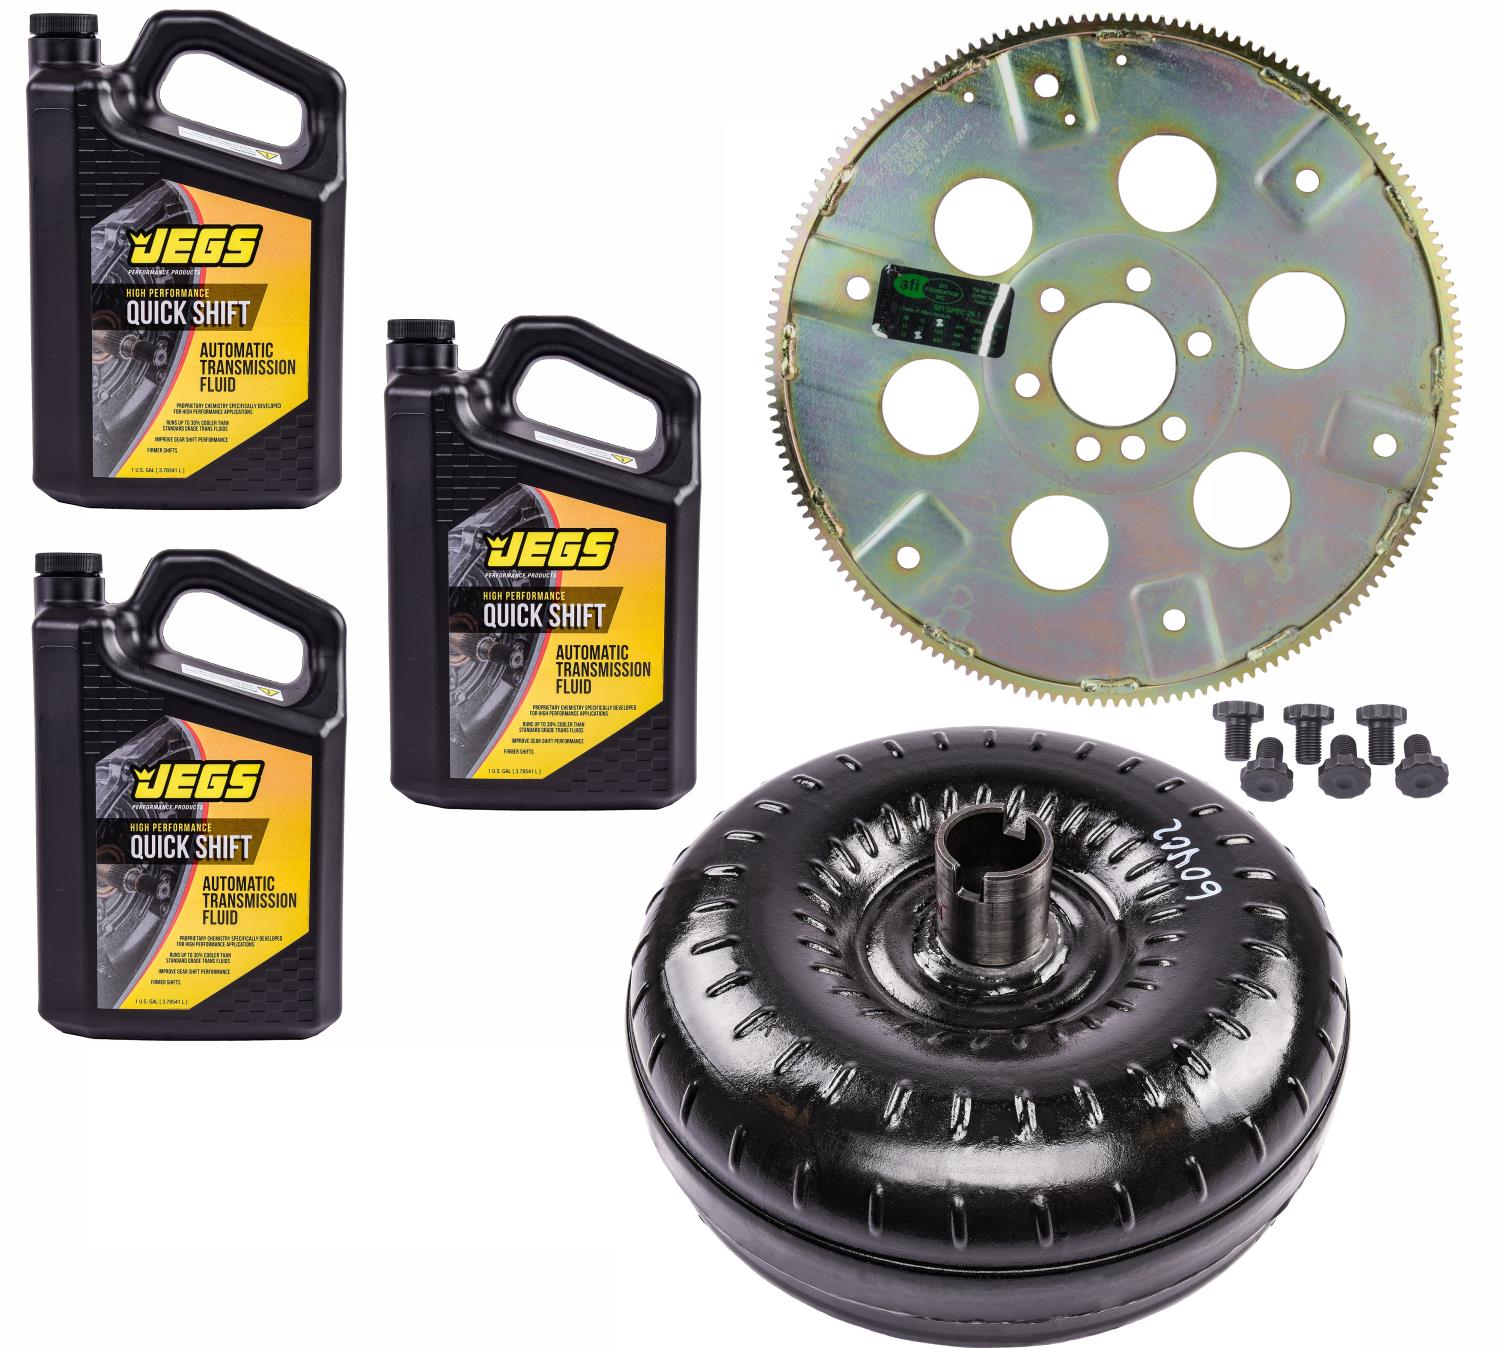 Torque Converter Kit with Flexplate and Transmission Fluid for GM TH350/TH400 [2000-2300 RPM Stall Speed]